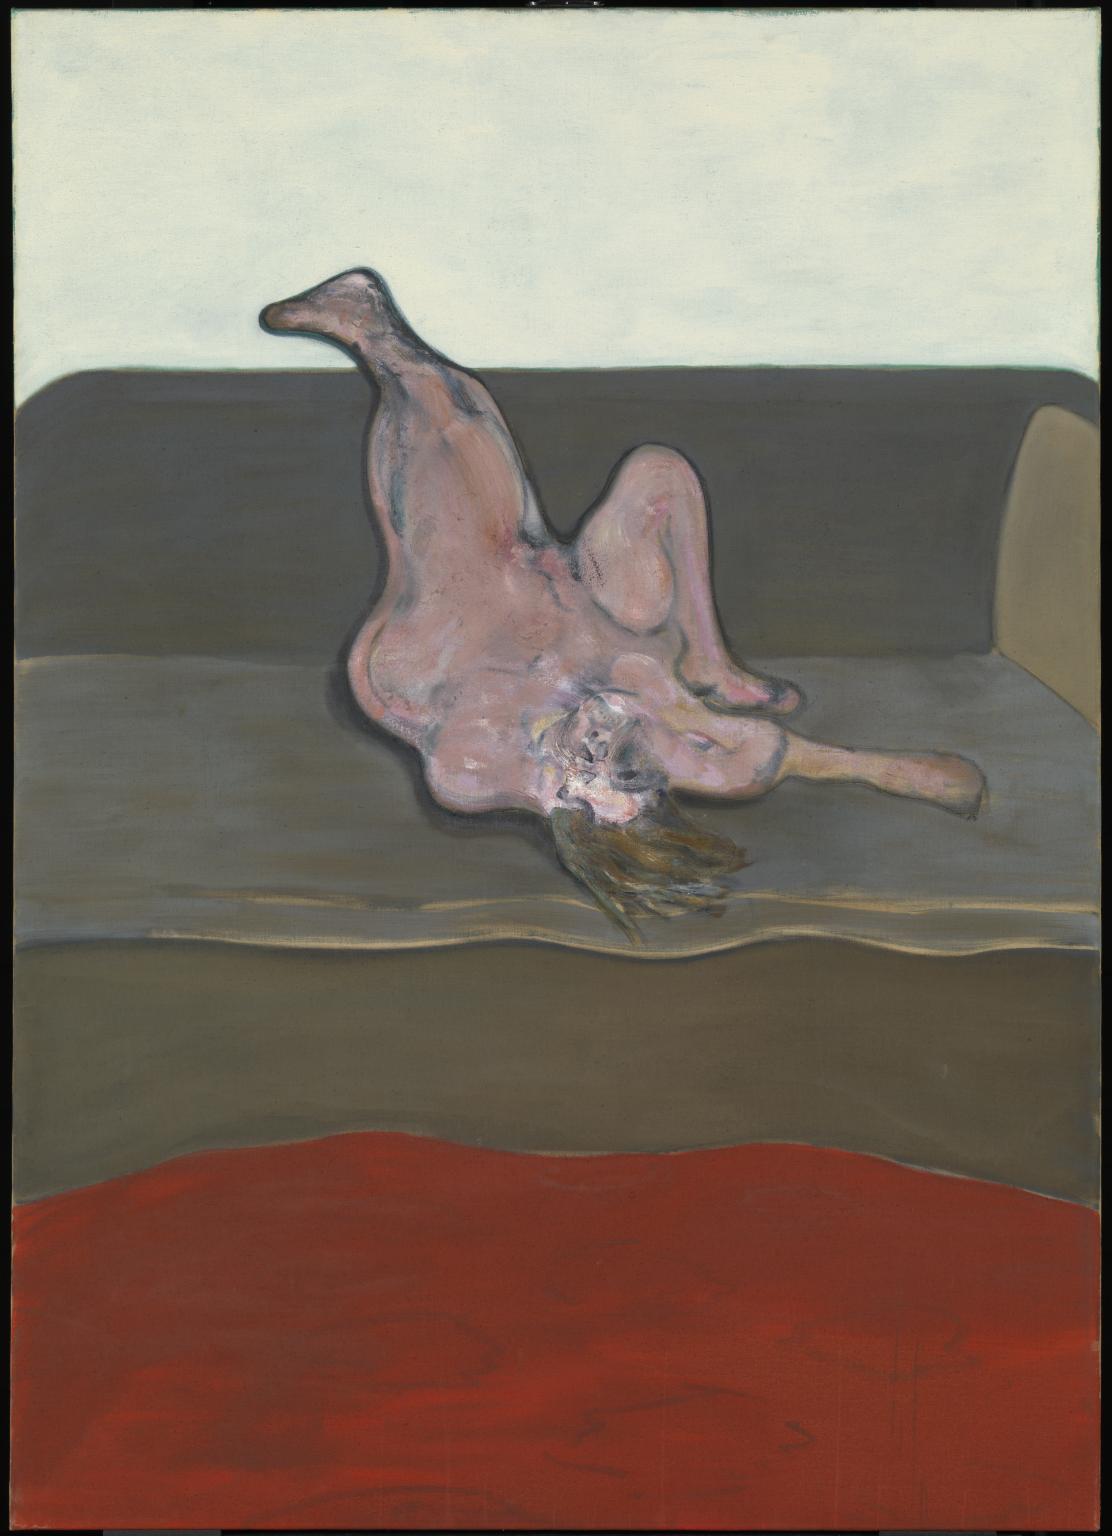 Reclining Woman 1961 Francis Bacon 1909-1992 Purchased 1961 http://www.tate.org.uk/art/work/T00453